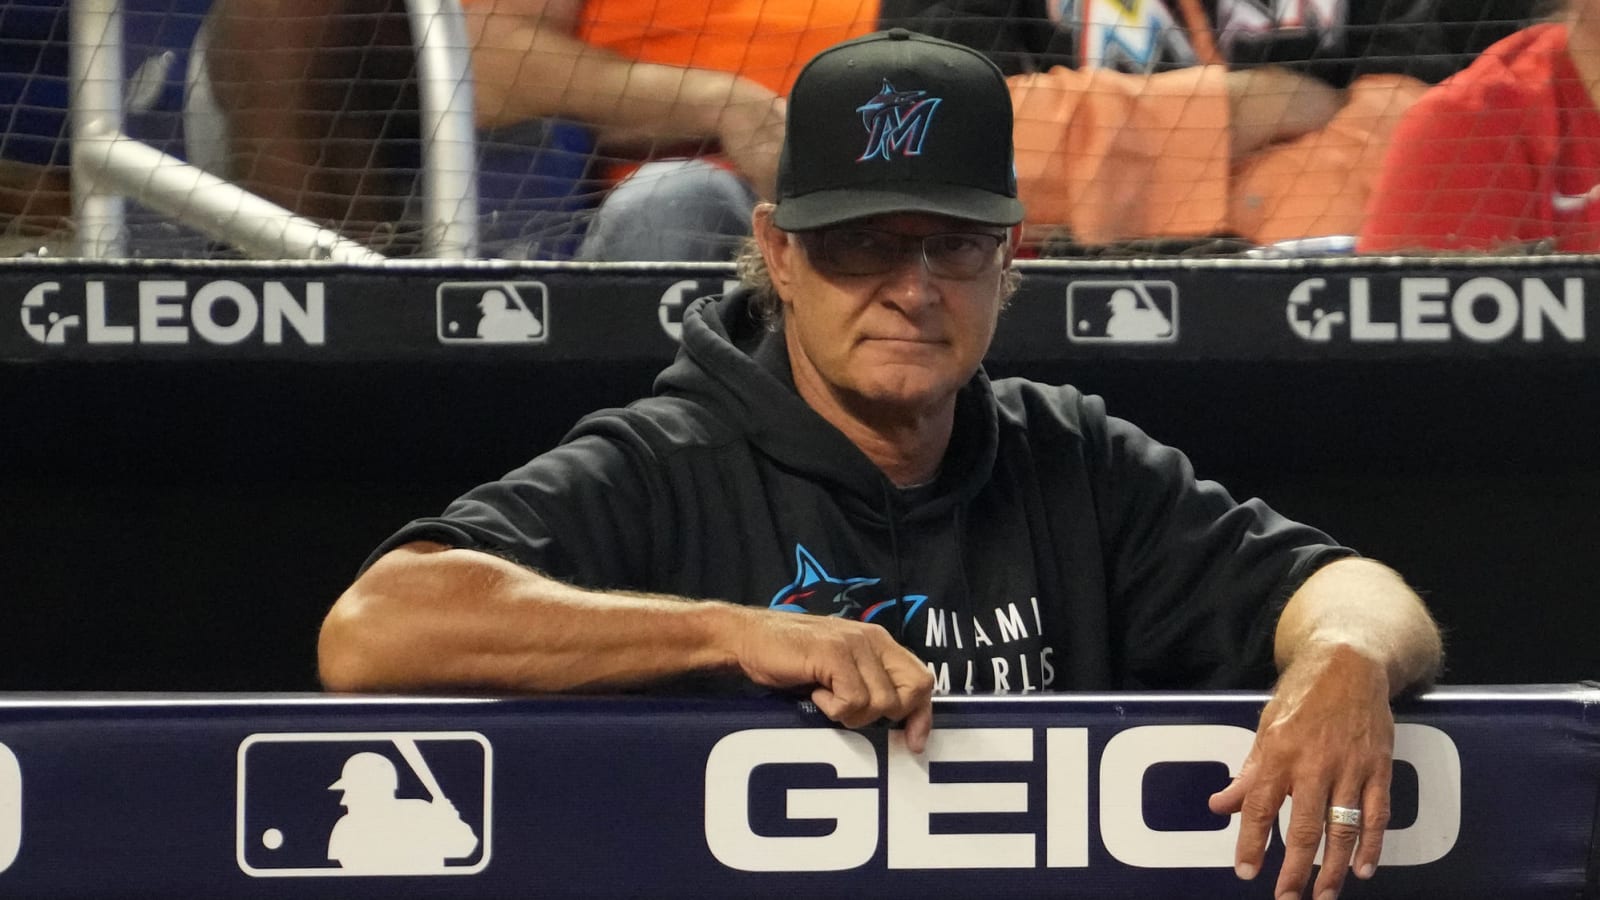 Marlins manager Don Mattingly tests positive for COVID-19, misses game